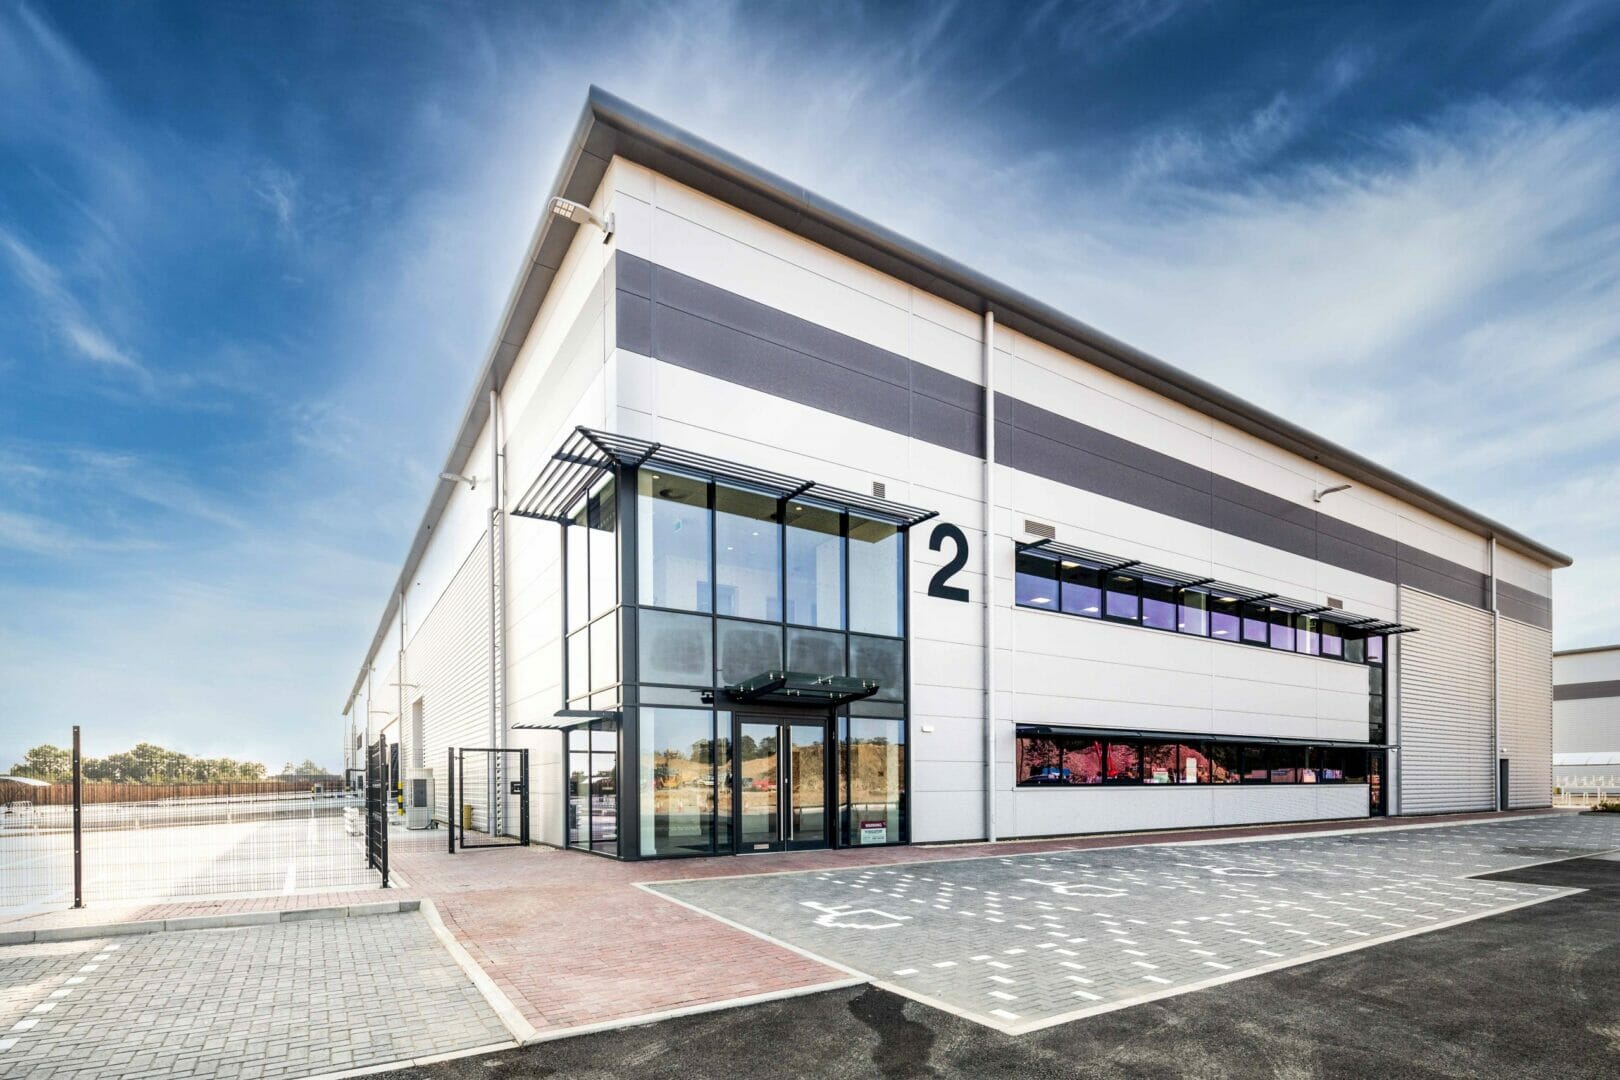 Axis J9, Aver Property Partnership’s high-spec logistics hub in Bicester, Oxfordshire, is fully let